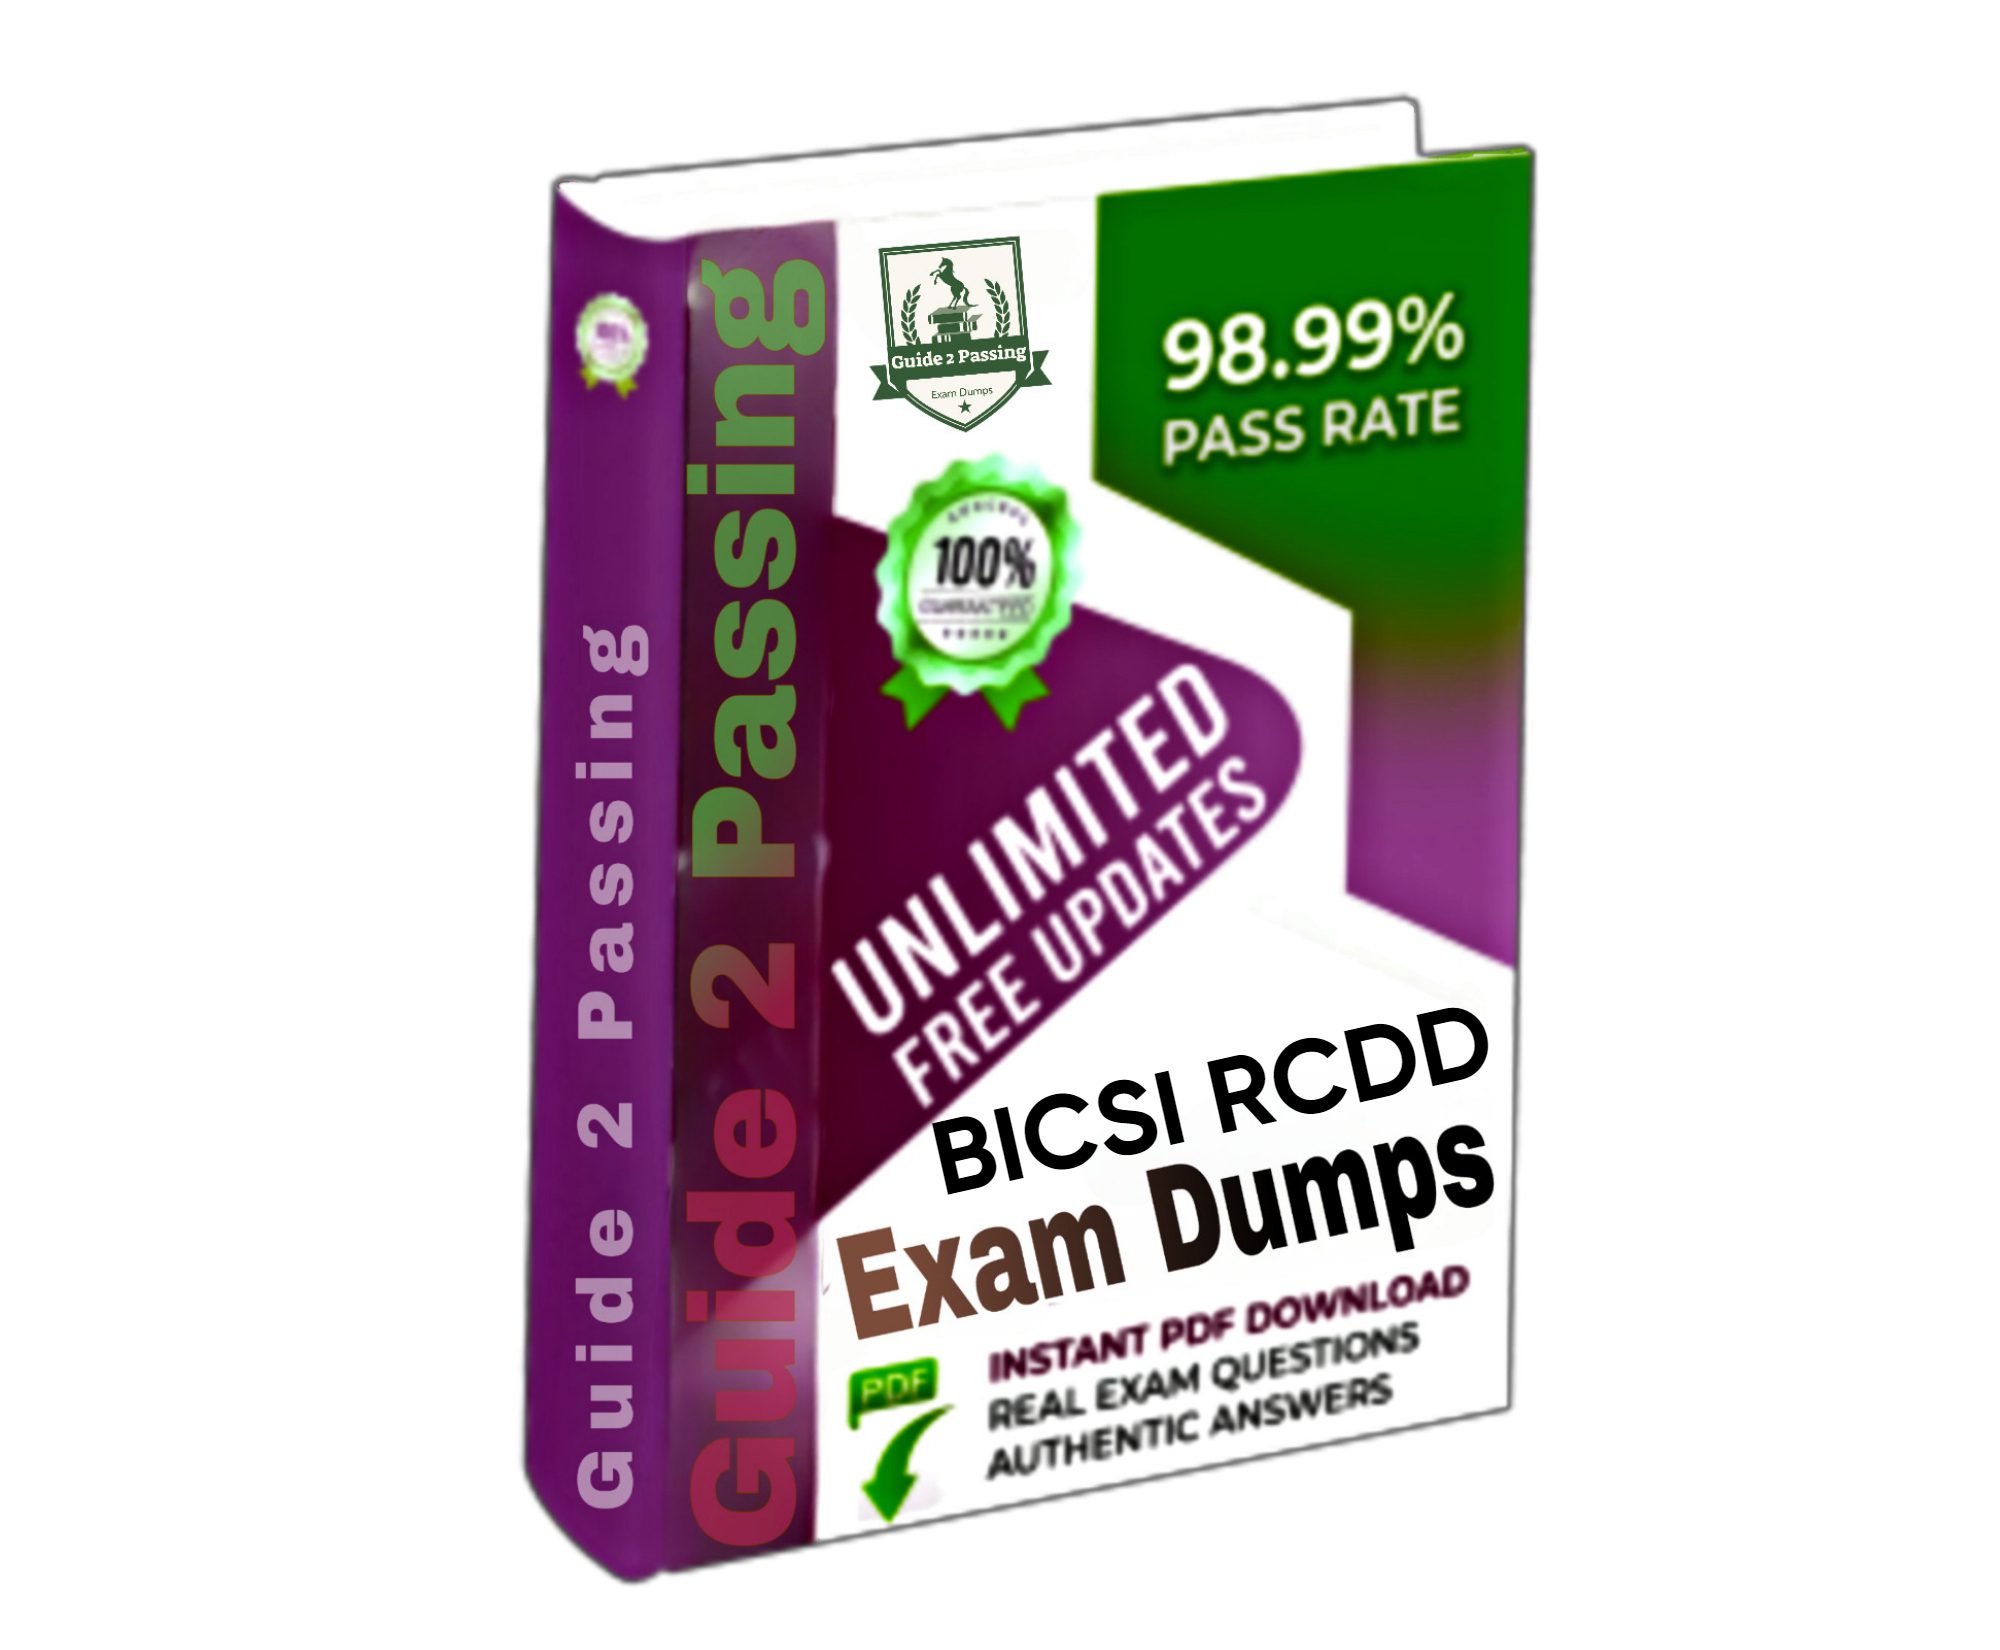 Pass Your BICSI RCDD Exam Dumps From Guide 2 Passing